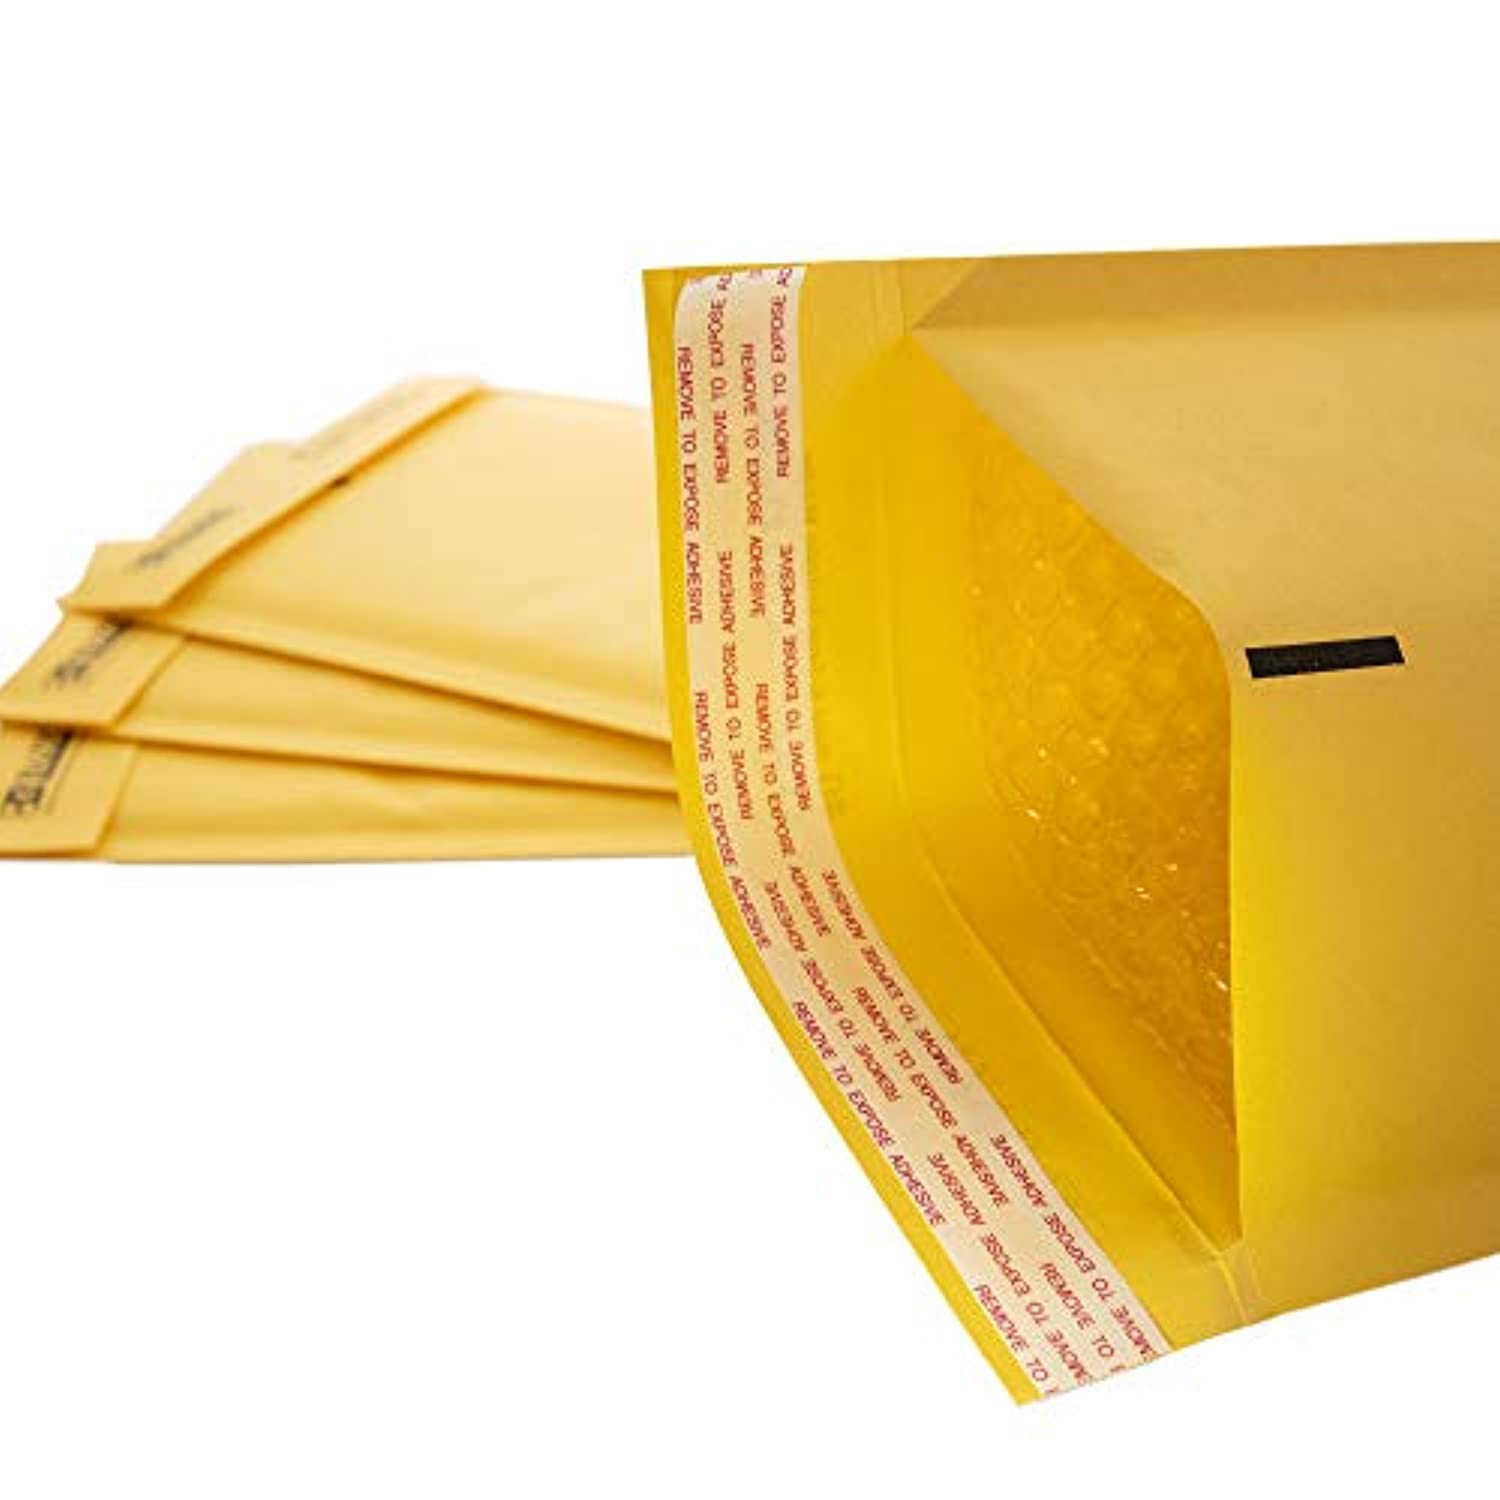 G8Central #0 Self-Seal Bubble Mailers 6x9.25, Self-Adhesive Closure Kraft Padded Yellow Envelopes Self Seal, Waterproof Lined Poly Maile (4/Pack), 1-Pack.